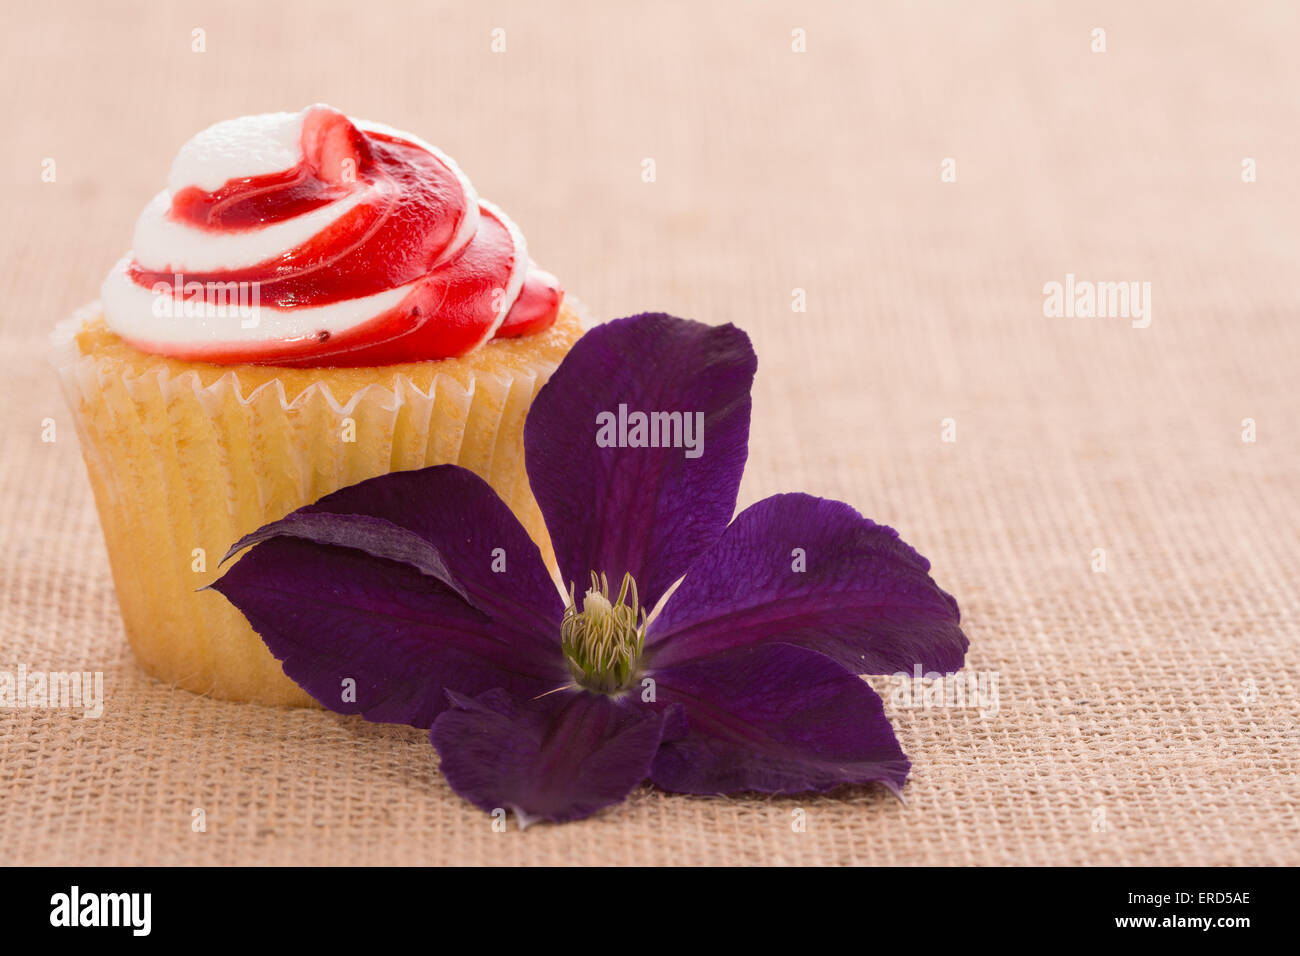 Cupcake with a Clematis flower on burlap background - a simple romantic gift Stock Photo